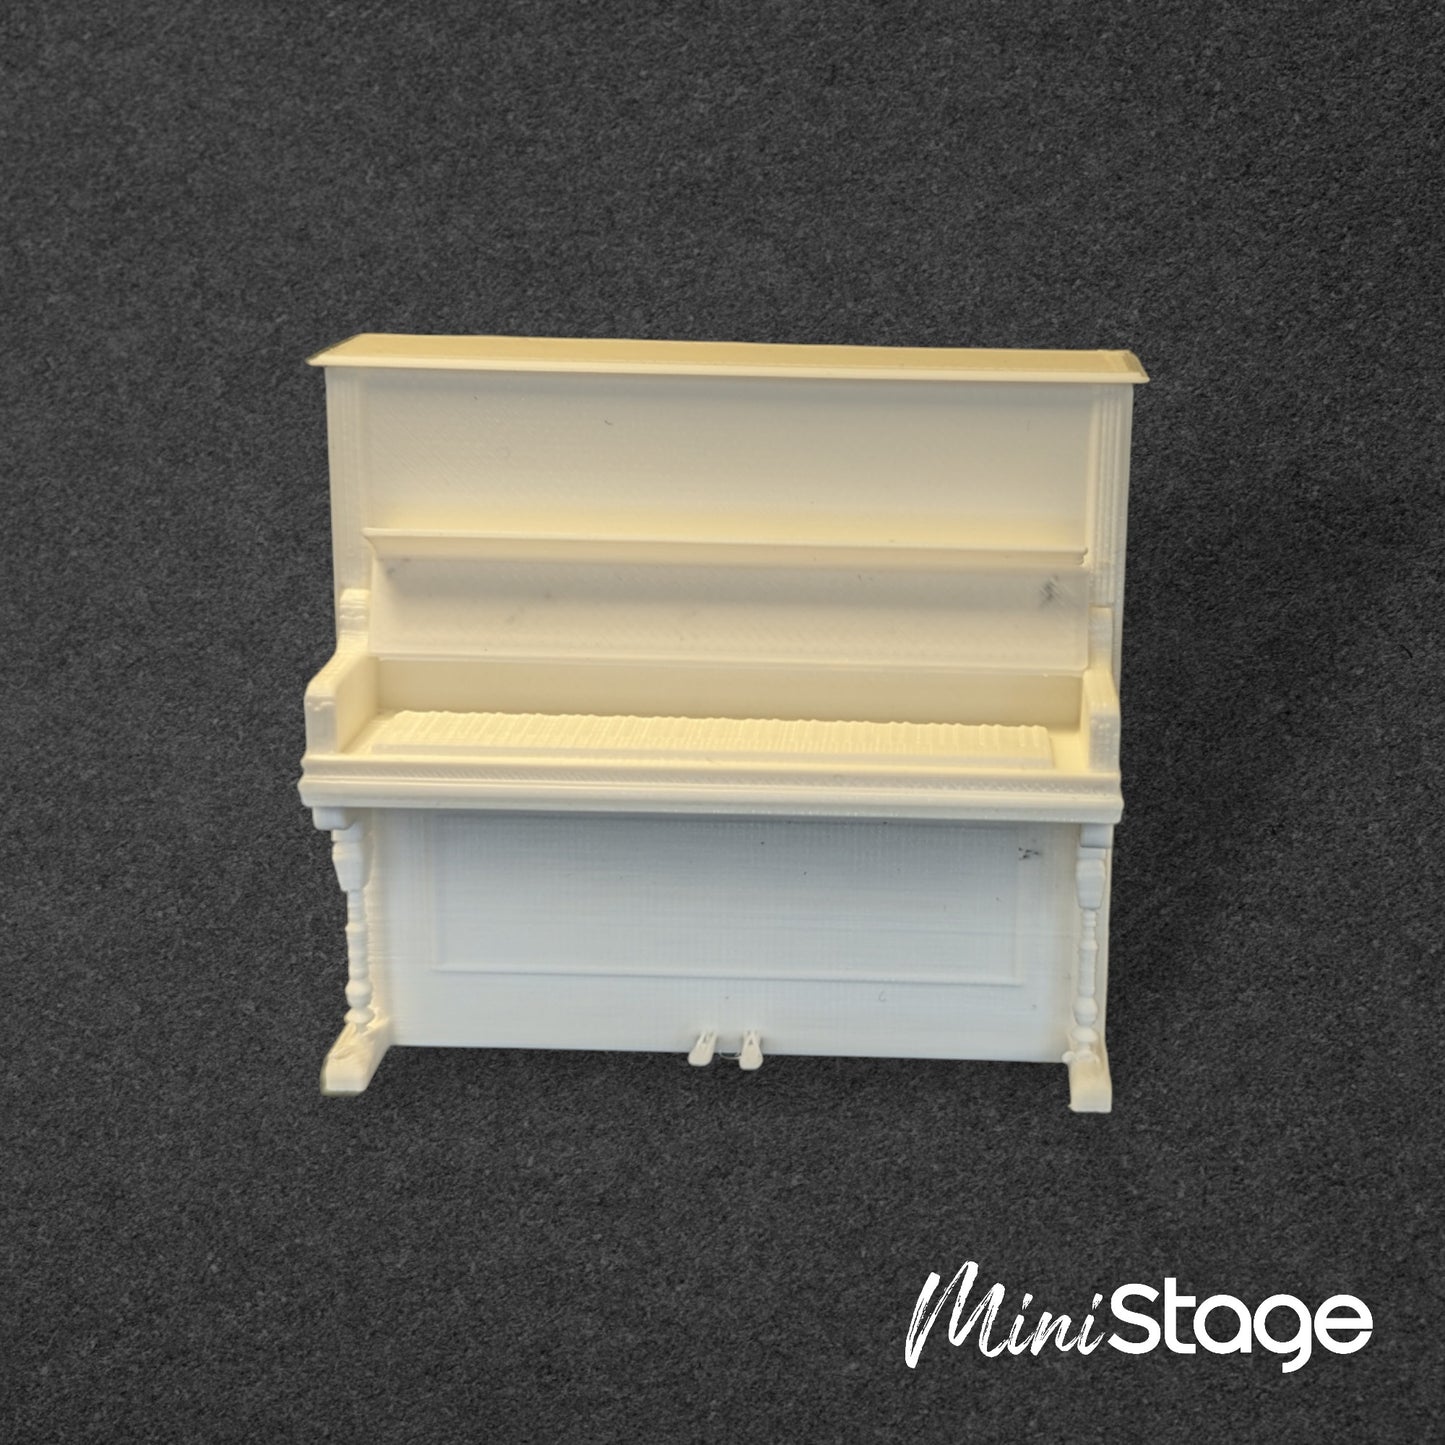 1:25 Scale 3D Printed Model of an Upright Piano